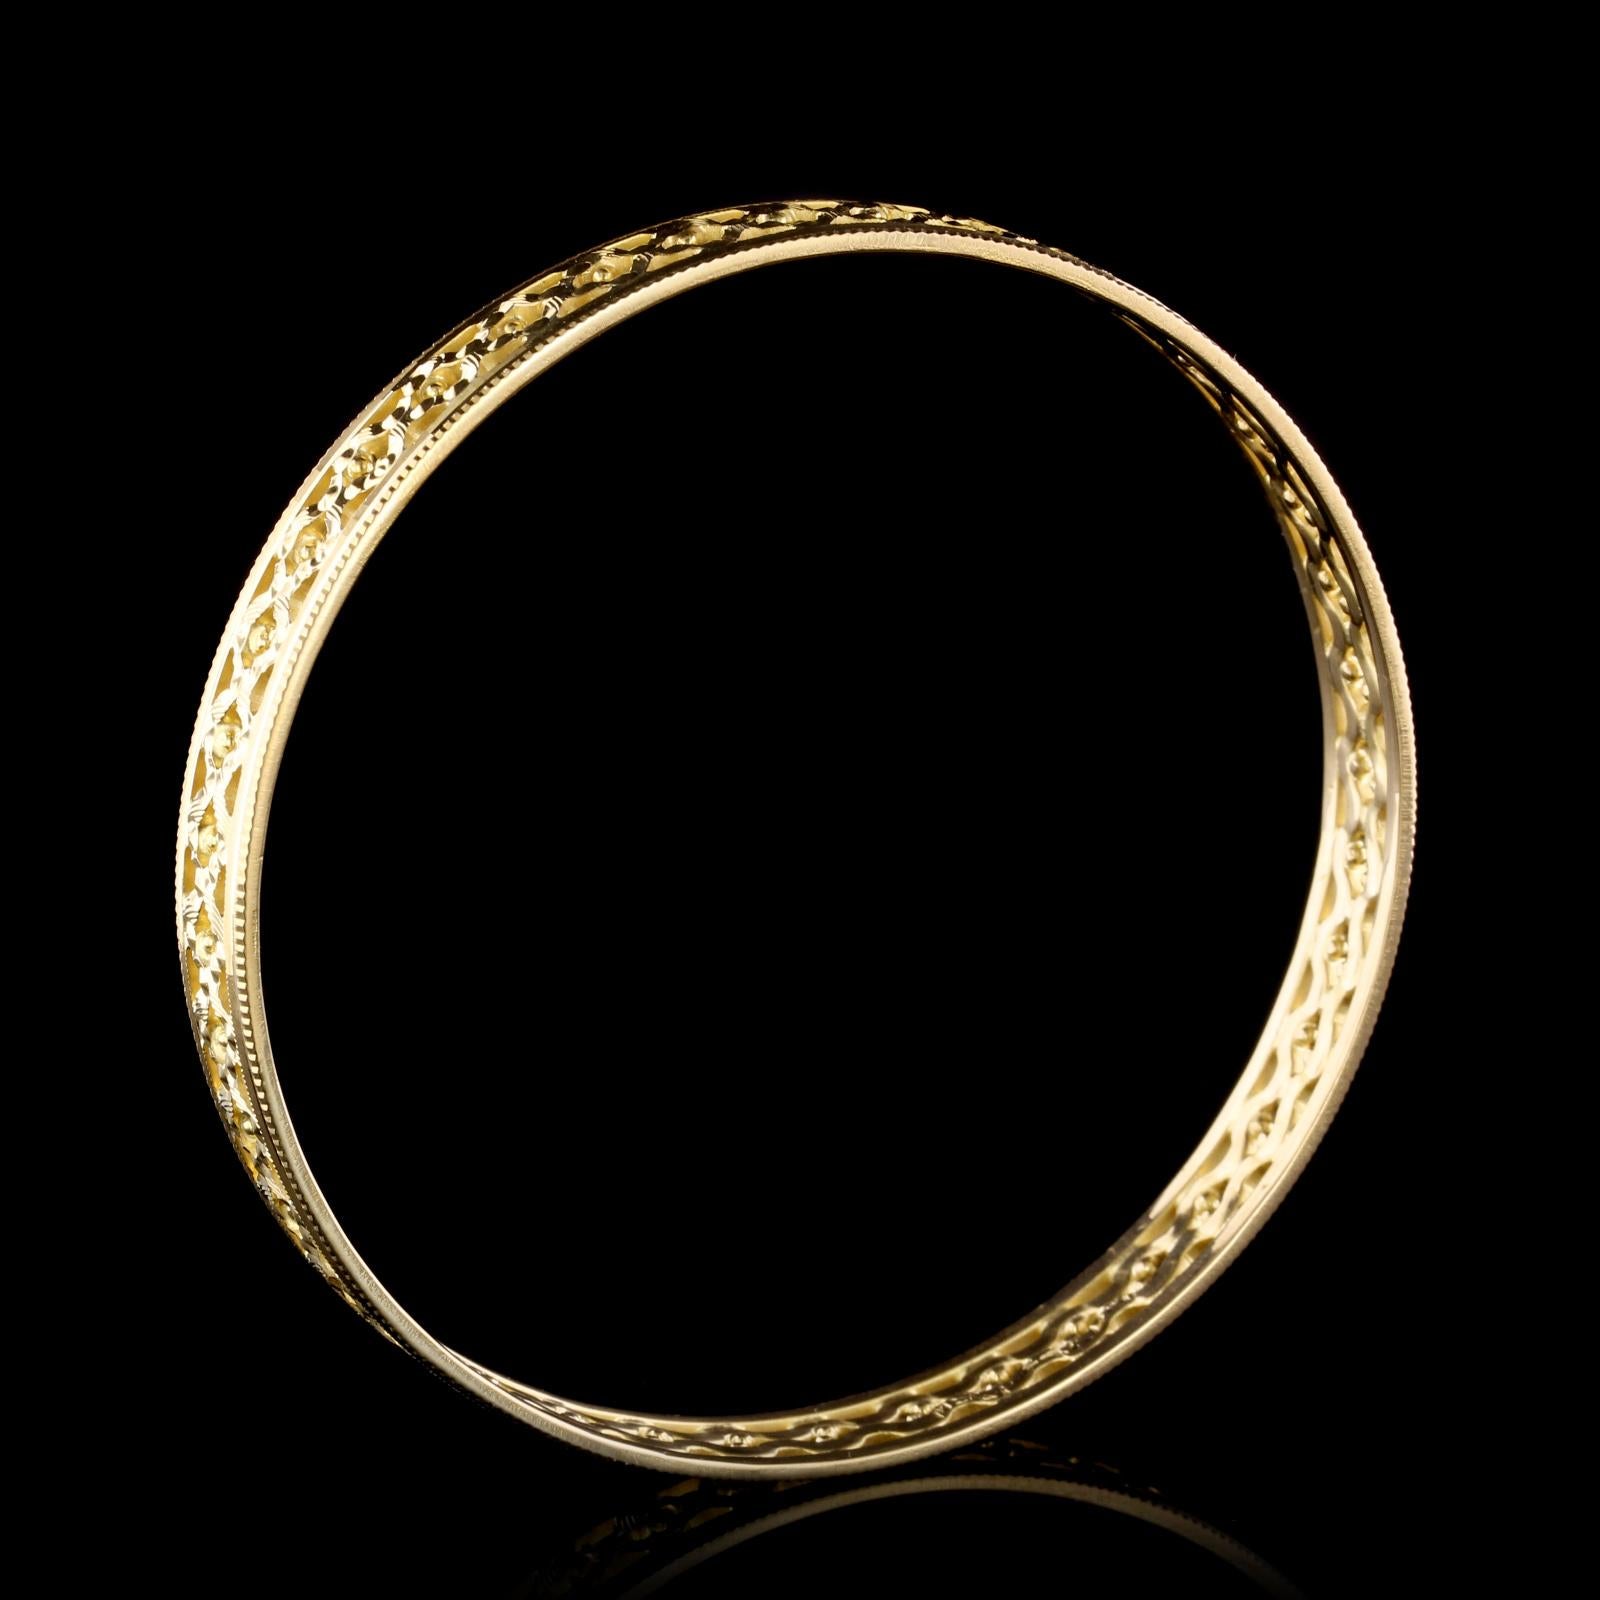 22 Karat Yellow Gold Bangle Bracelet In Excellent Condition For Sale In Nashua, NH